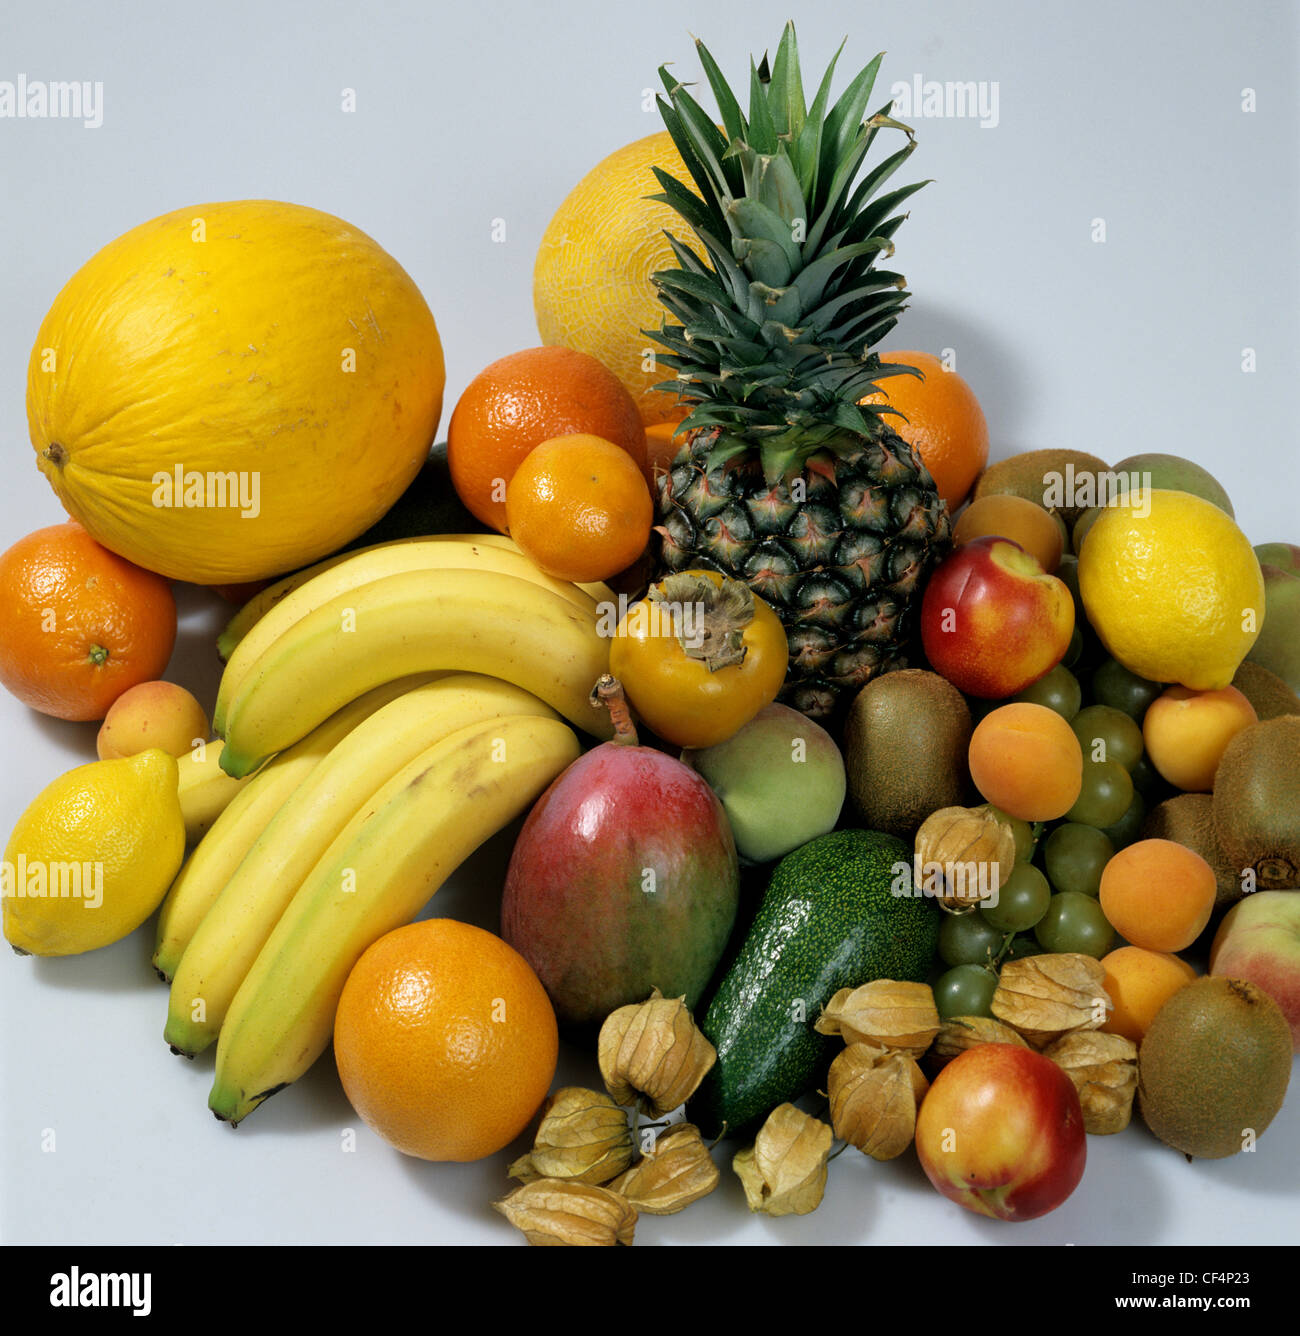 Tropical fruits bought in a supermarket Stock Photo